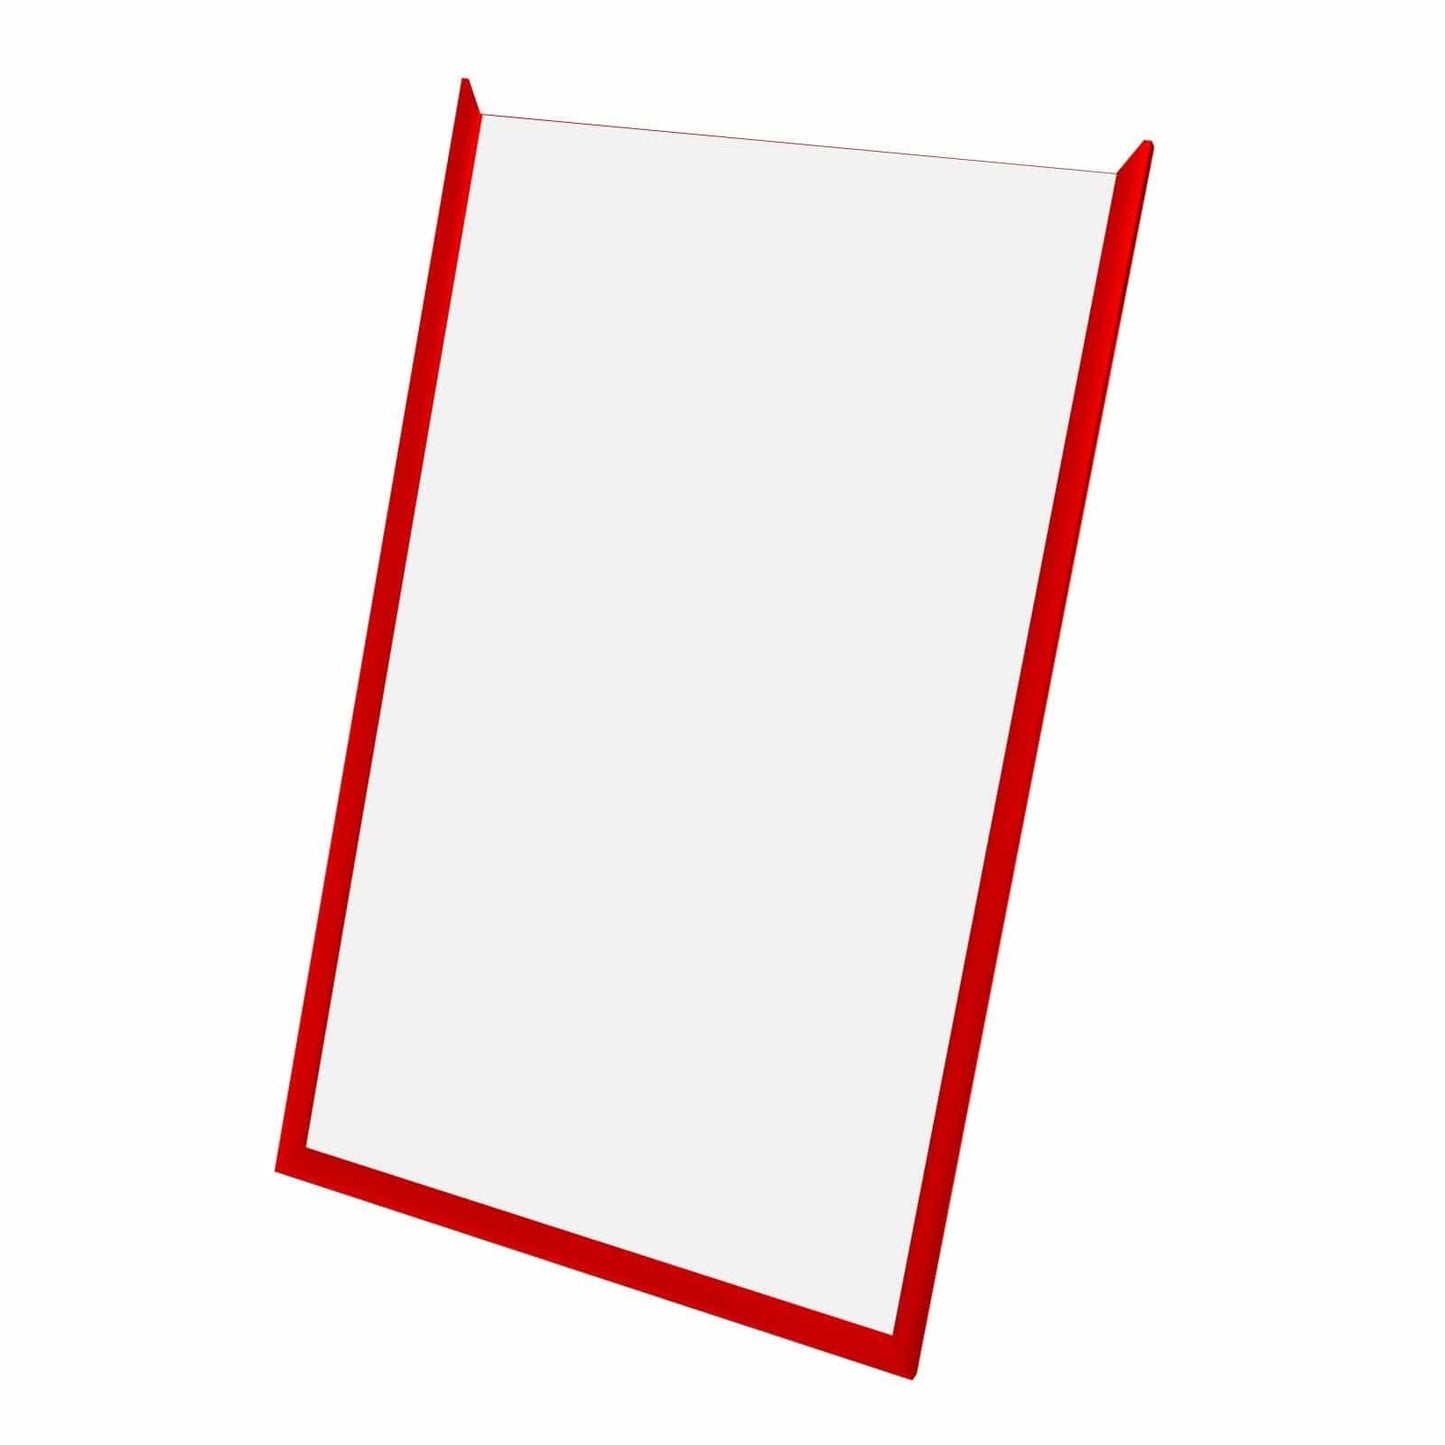 14x26 Red SnapeZo® Snap Frame - 1.2" Profile - Snap Frames Direct